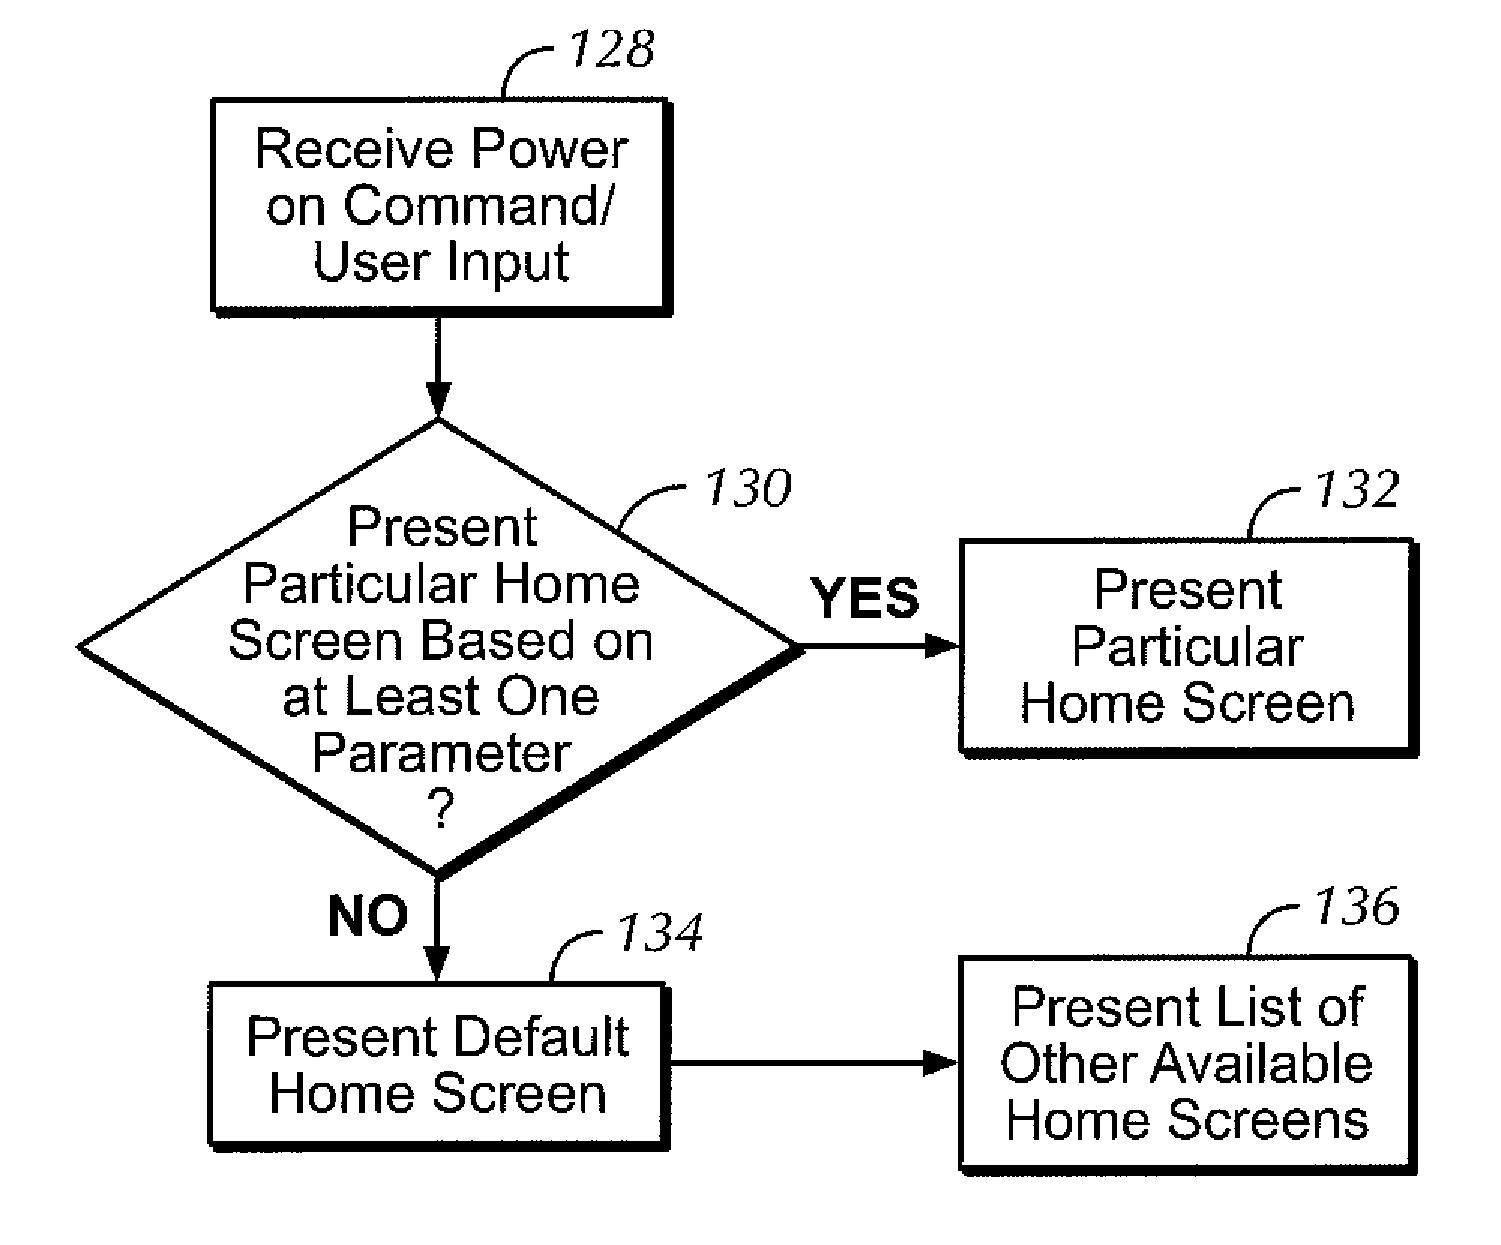 User-defined home screen for ultra high definition (UHD) TV